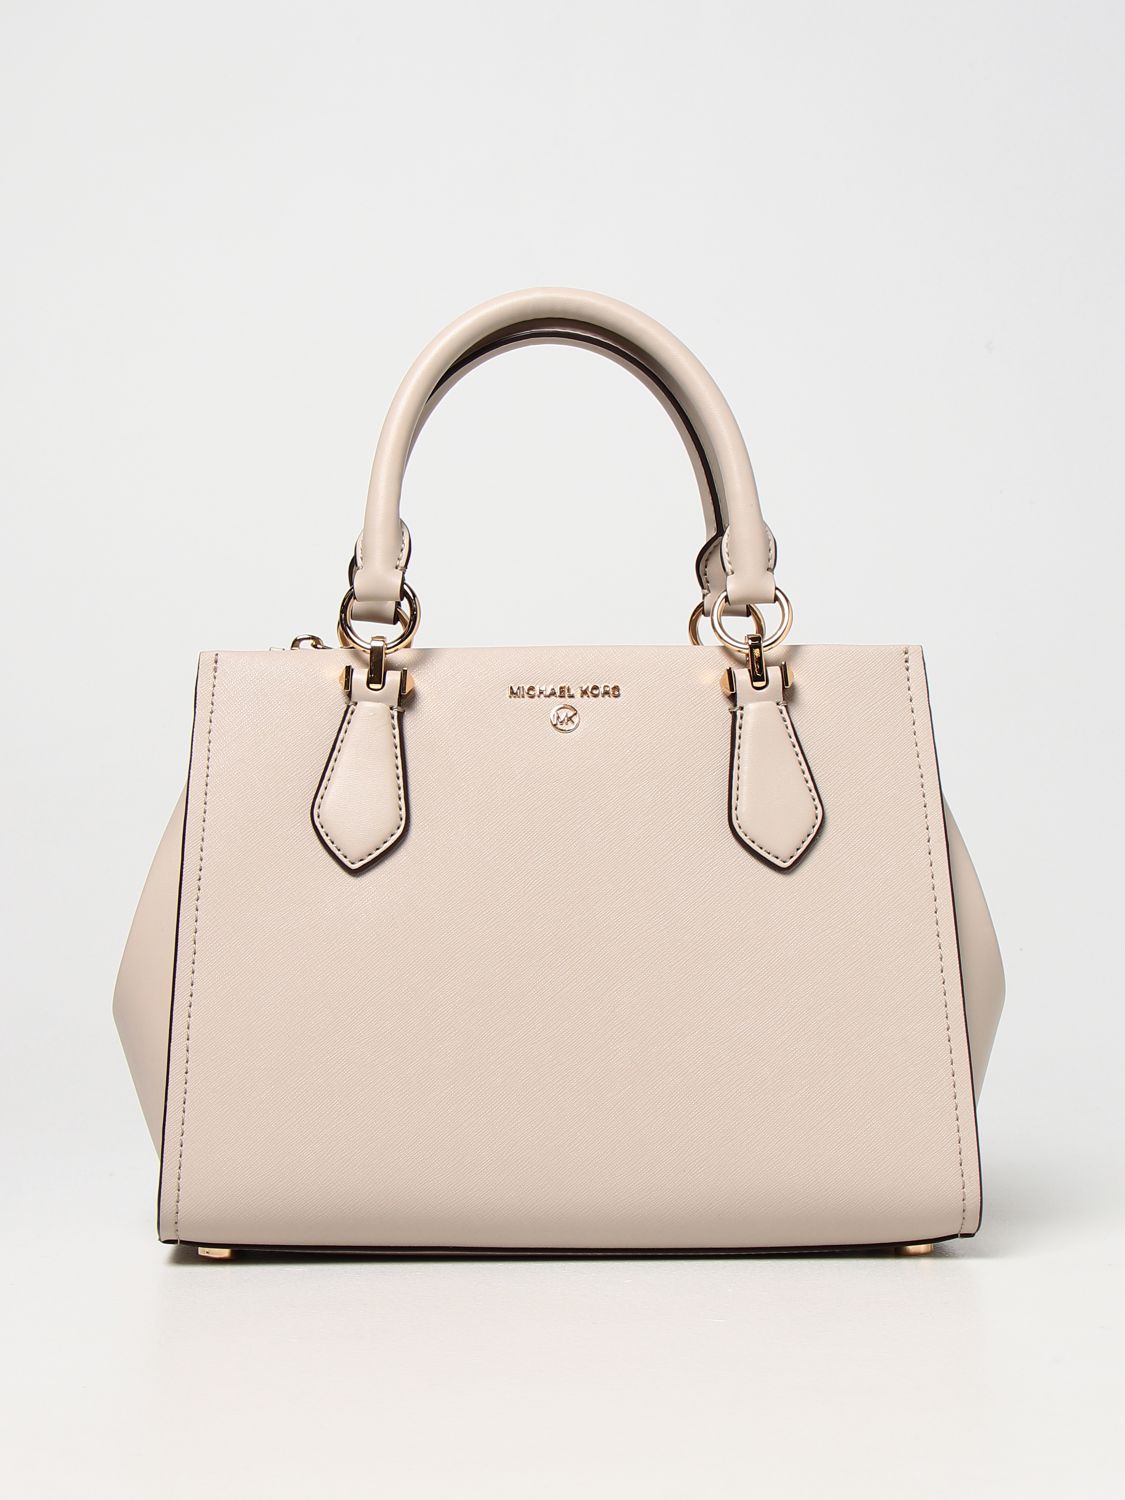 MICHAEL KORS: Marilyn Michael bag in Saffiano leather - Sand